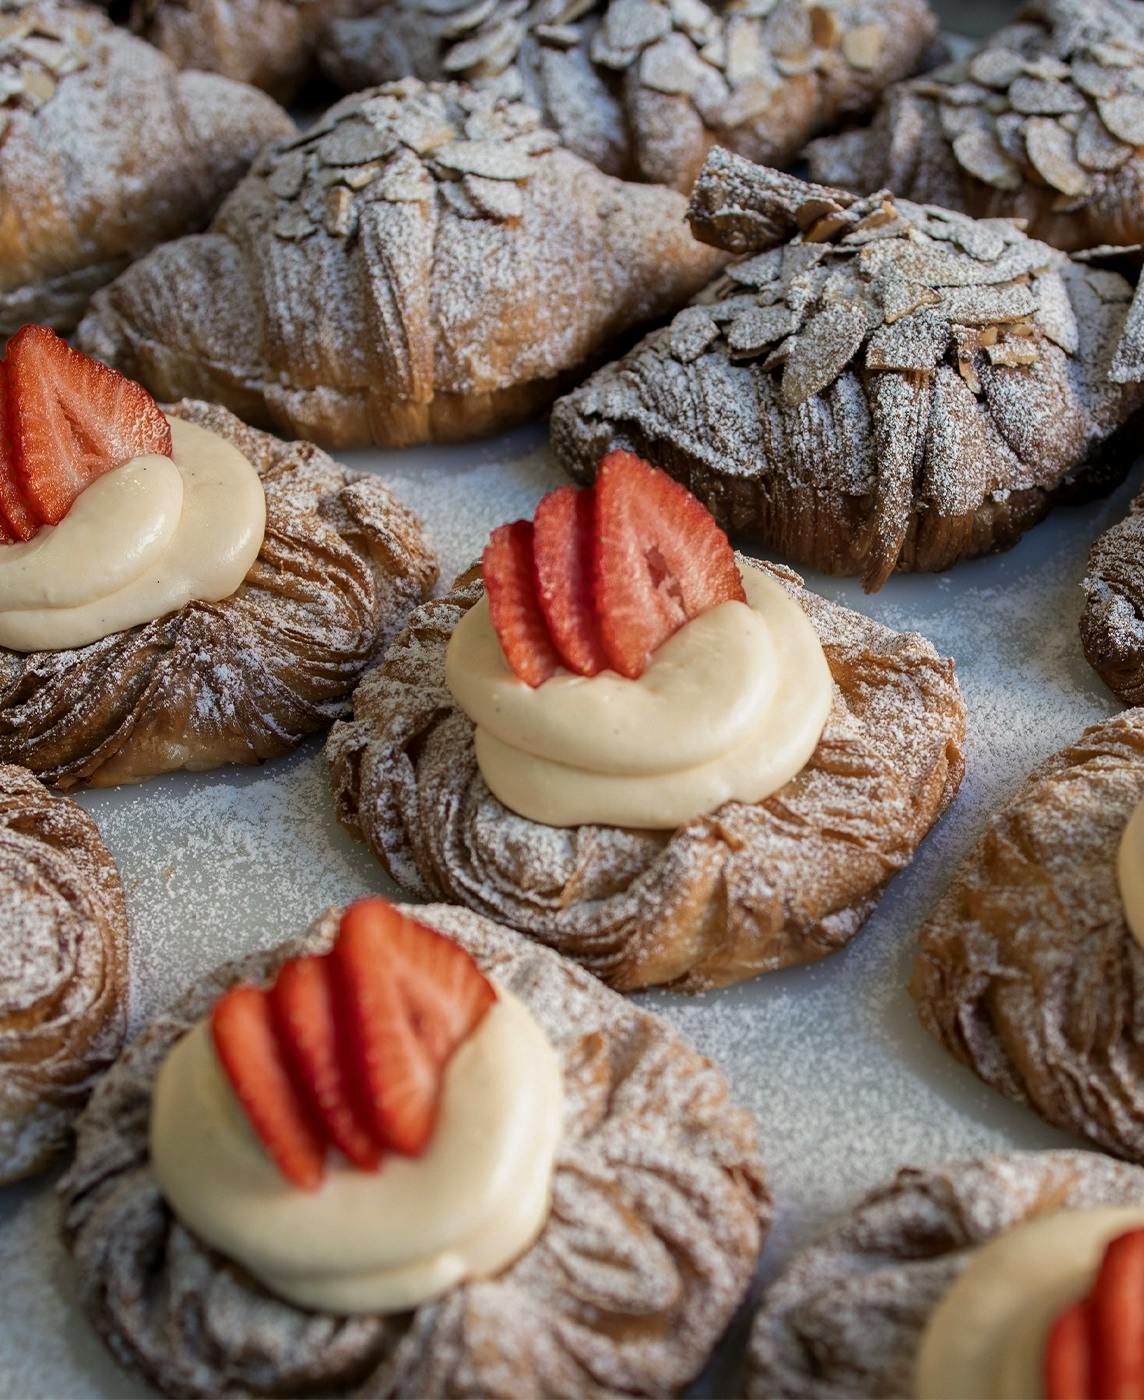 A tray filled with freshly baked pastries. Some pastries are topped with powdered sugar and almond slices, while others have a swirl of cream and sliced strawberries on top. The pastries have a golden, flaky texture and are arranged closely together.